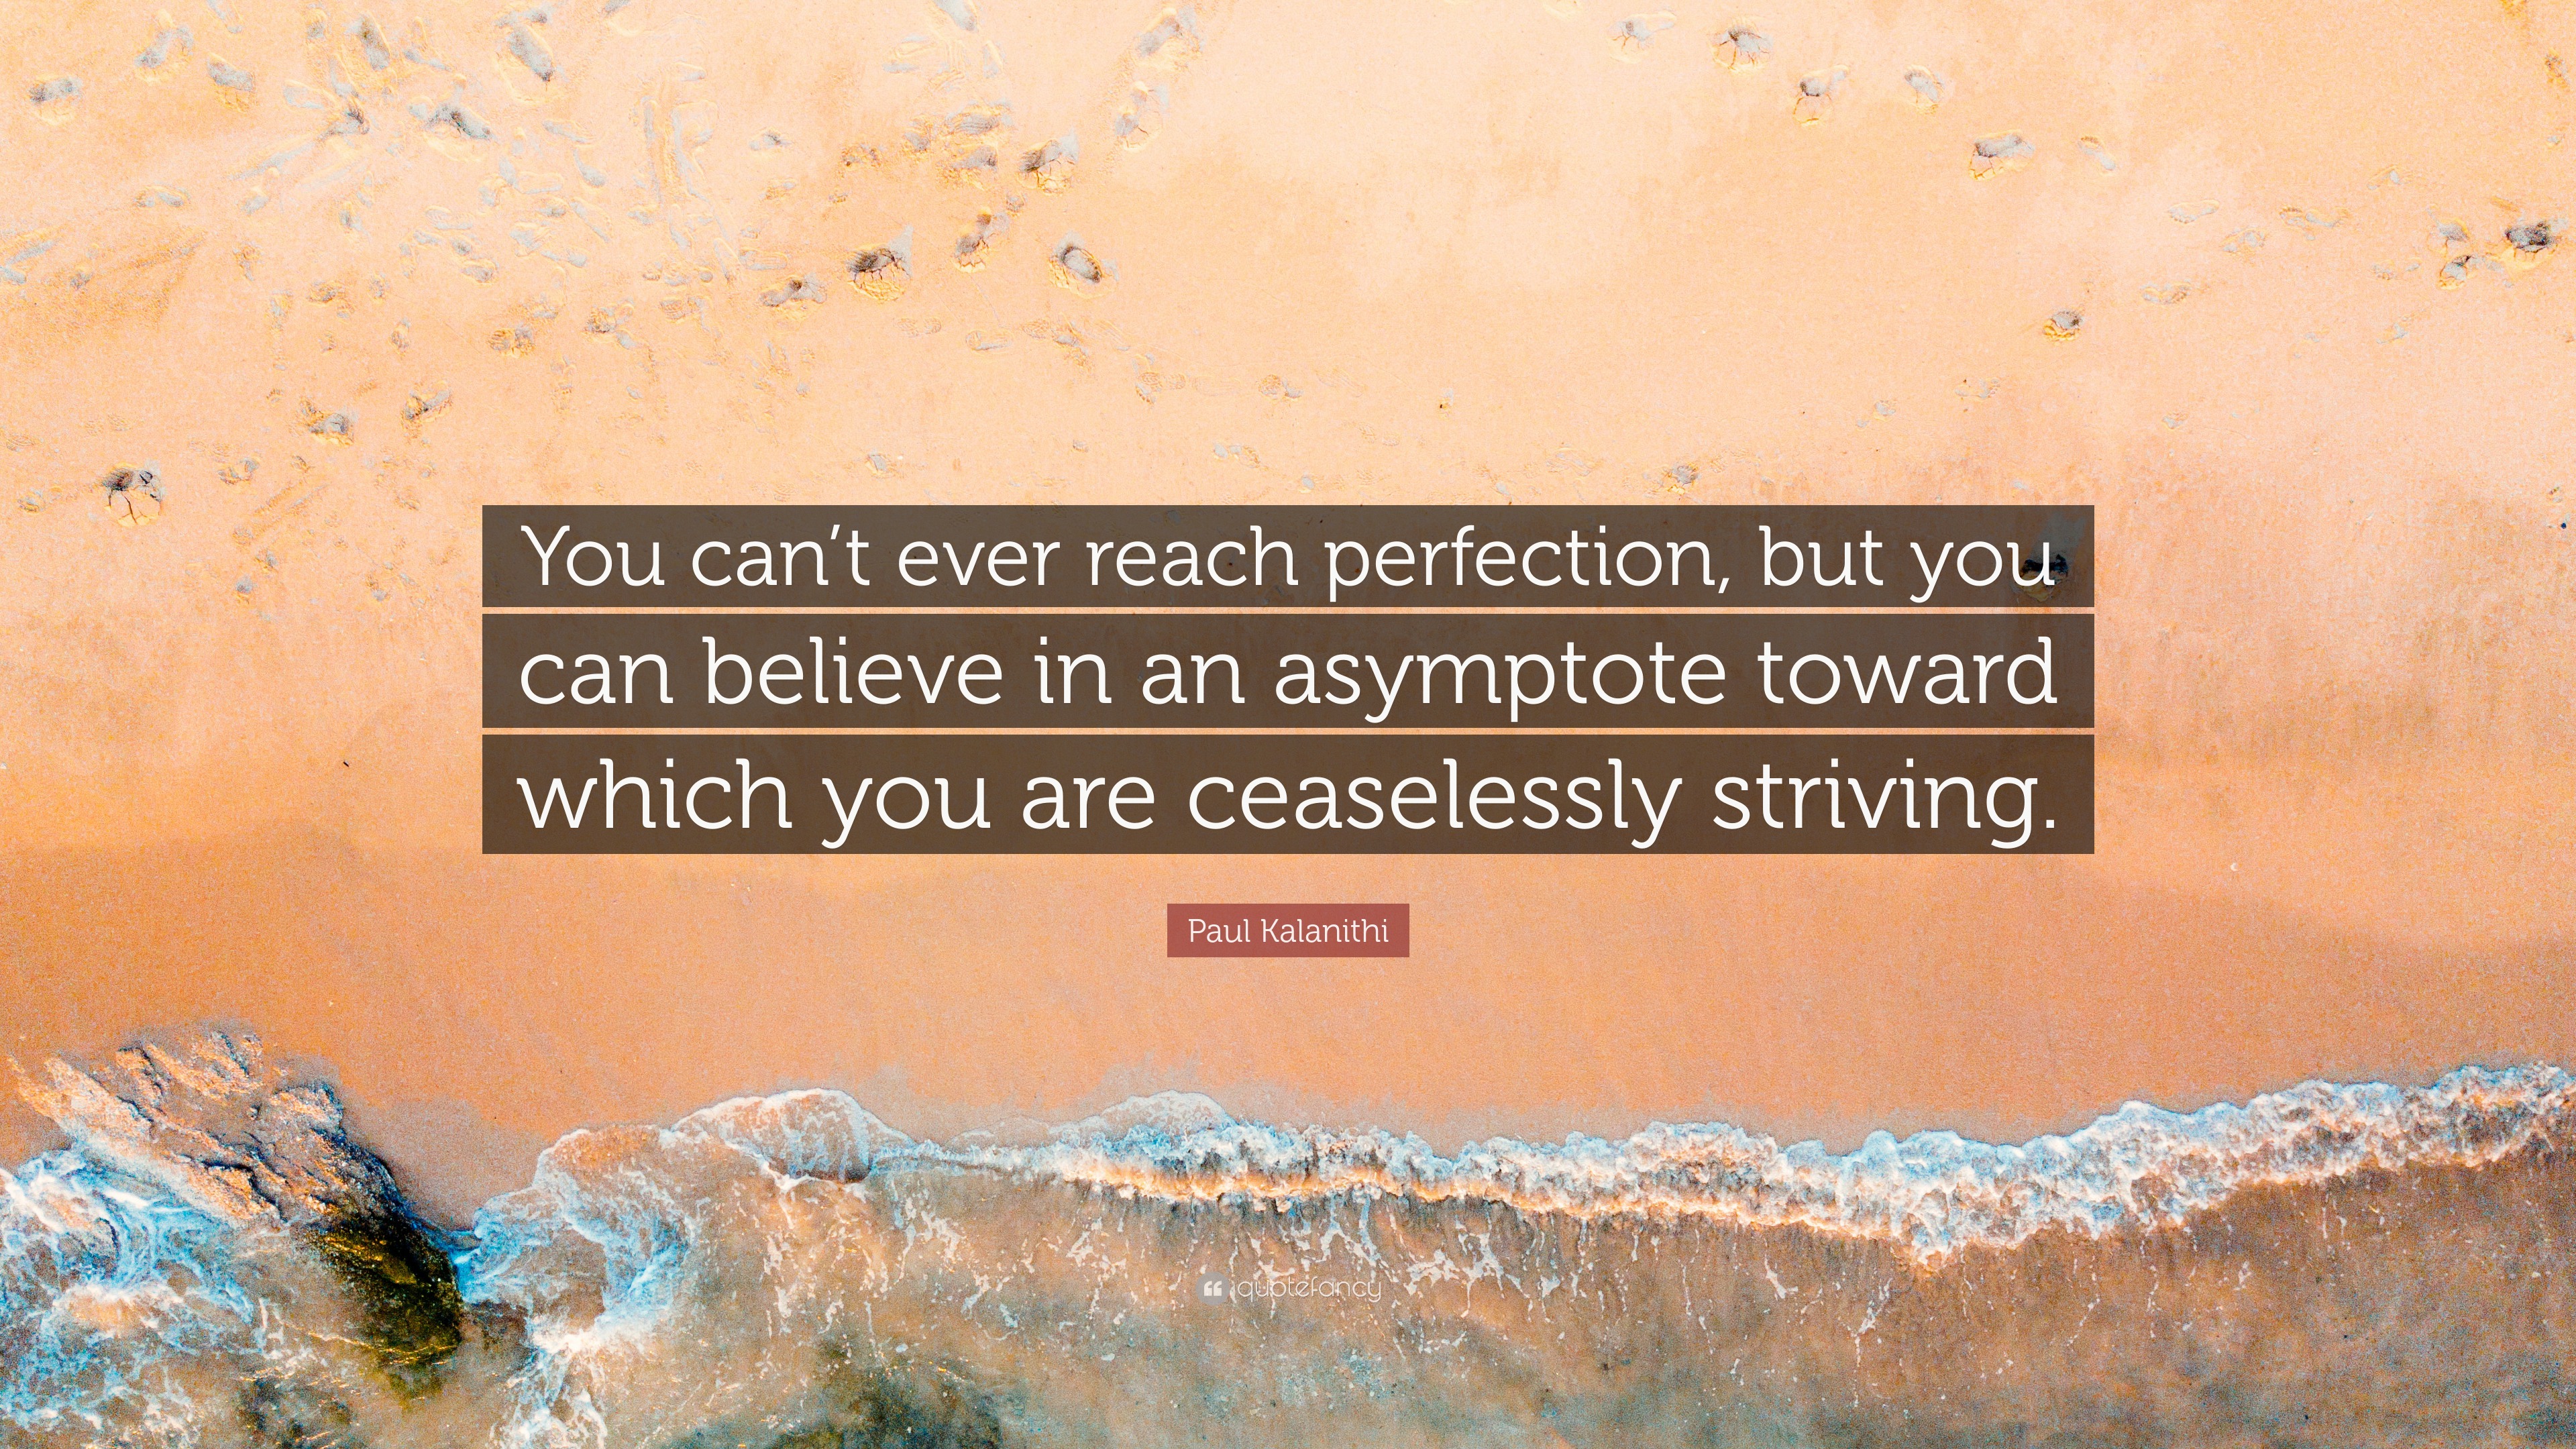 Paul Kalanithi Quote: “You can’t ever reach perfection, but you can